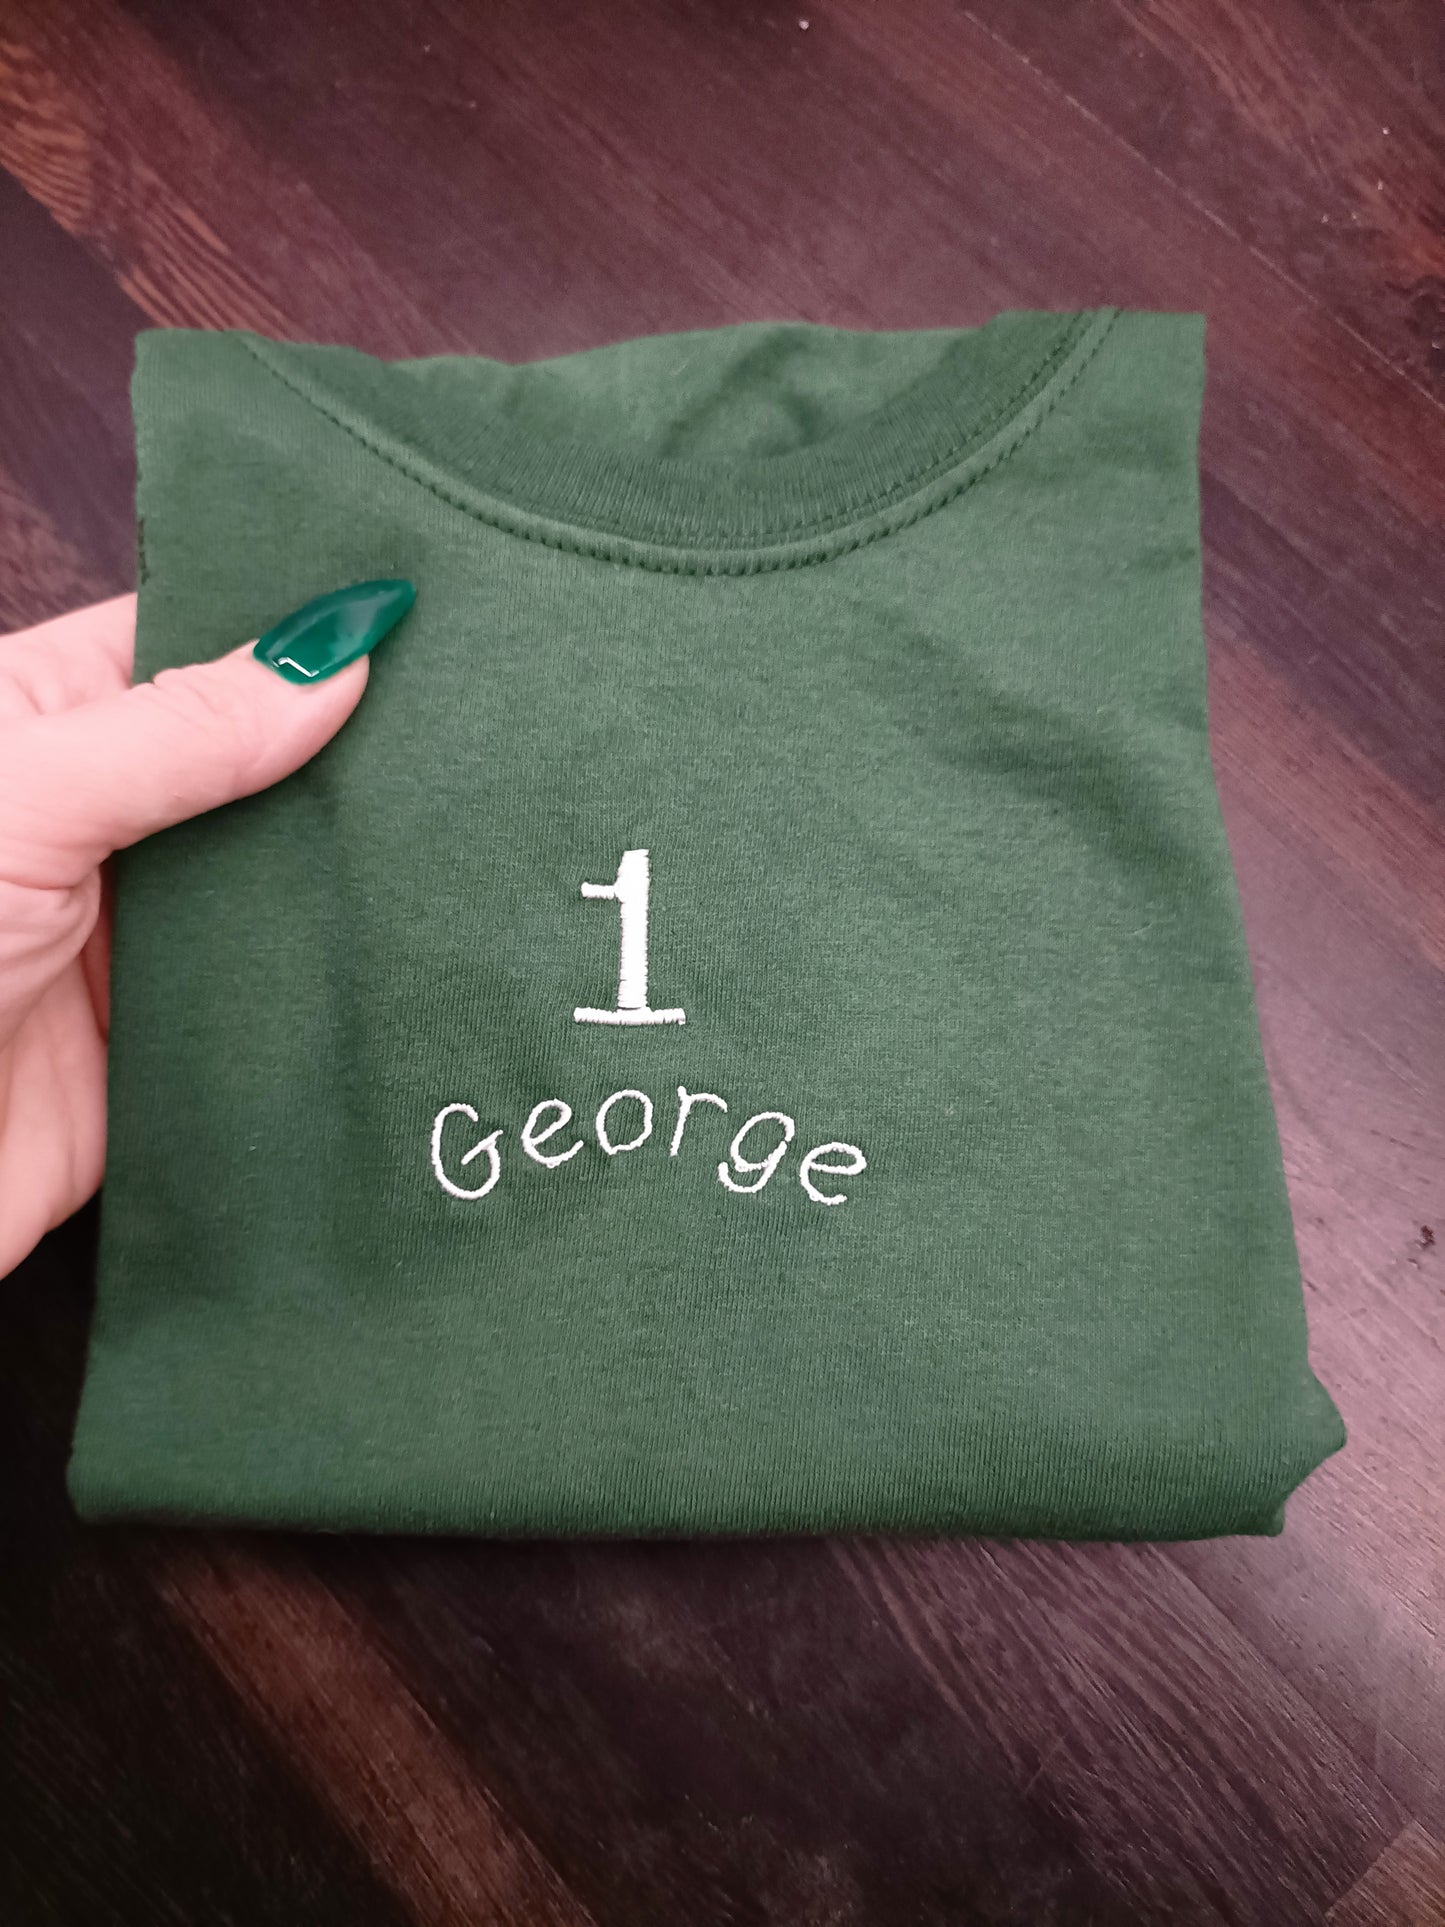 Personalised embroidery children's top